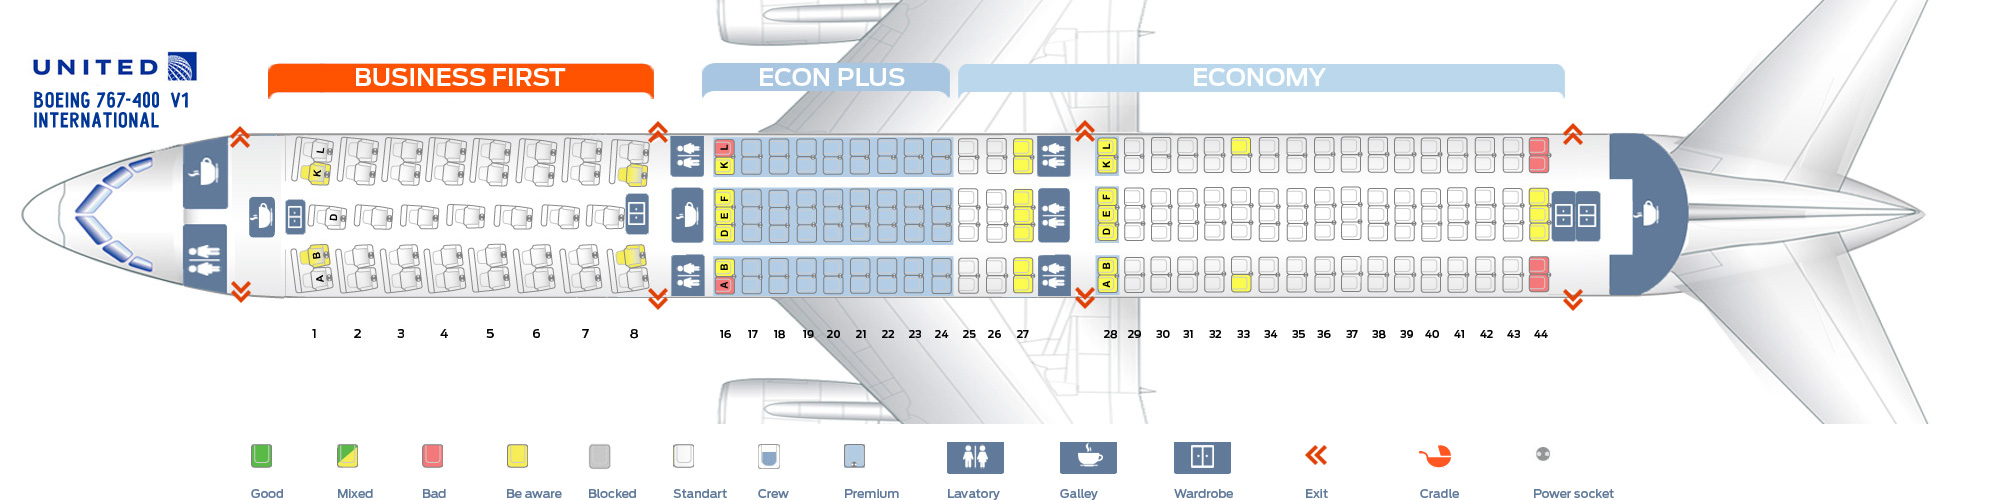 United Boeing 767 400 Seating Chart